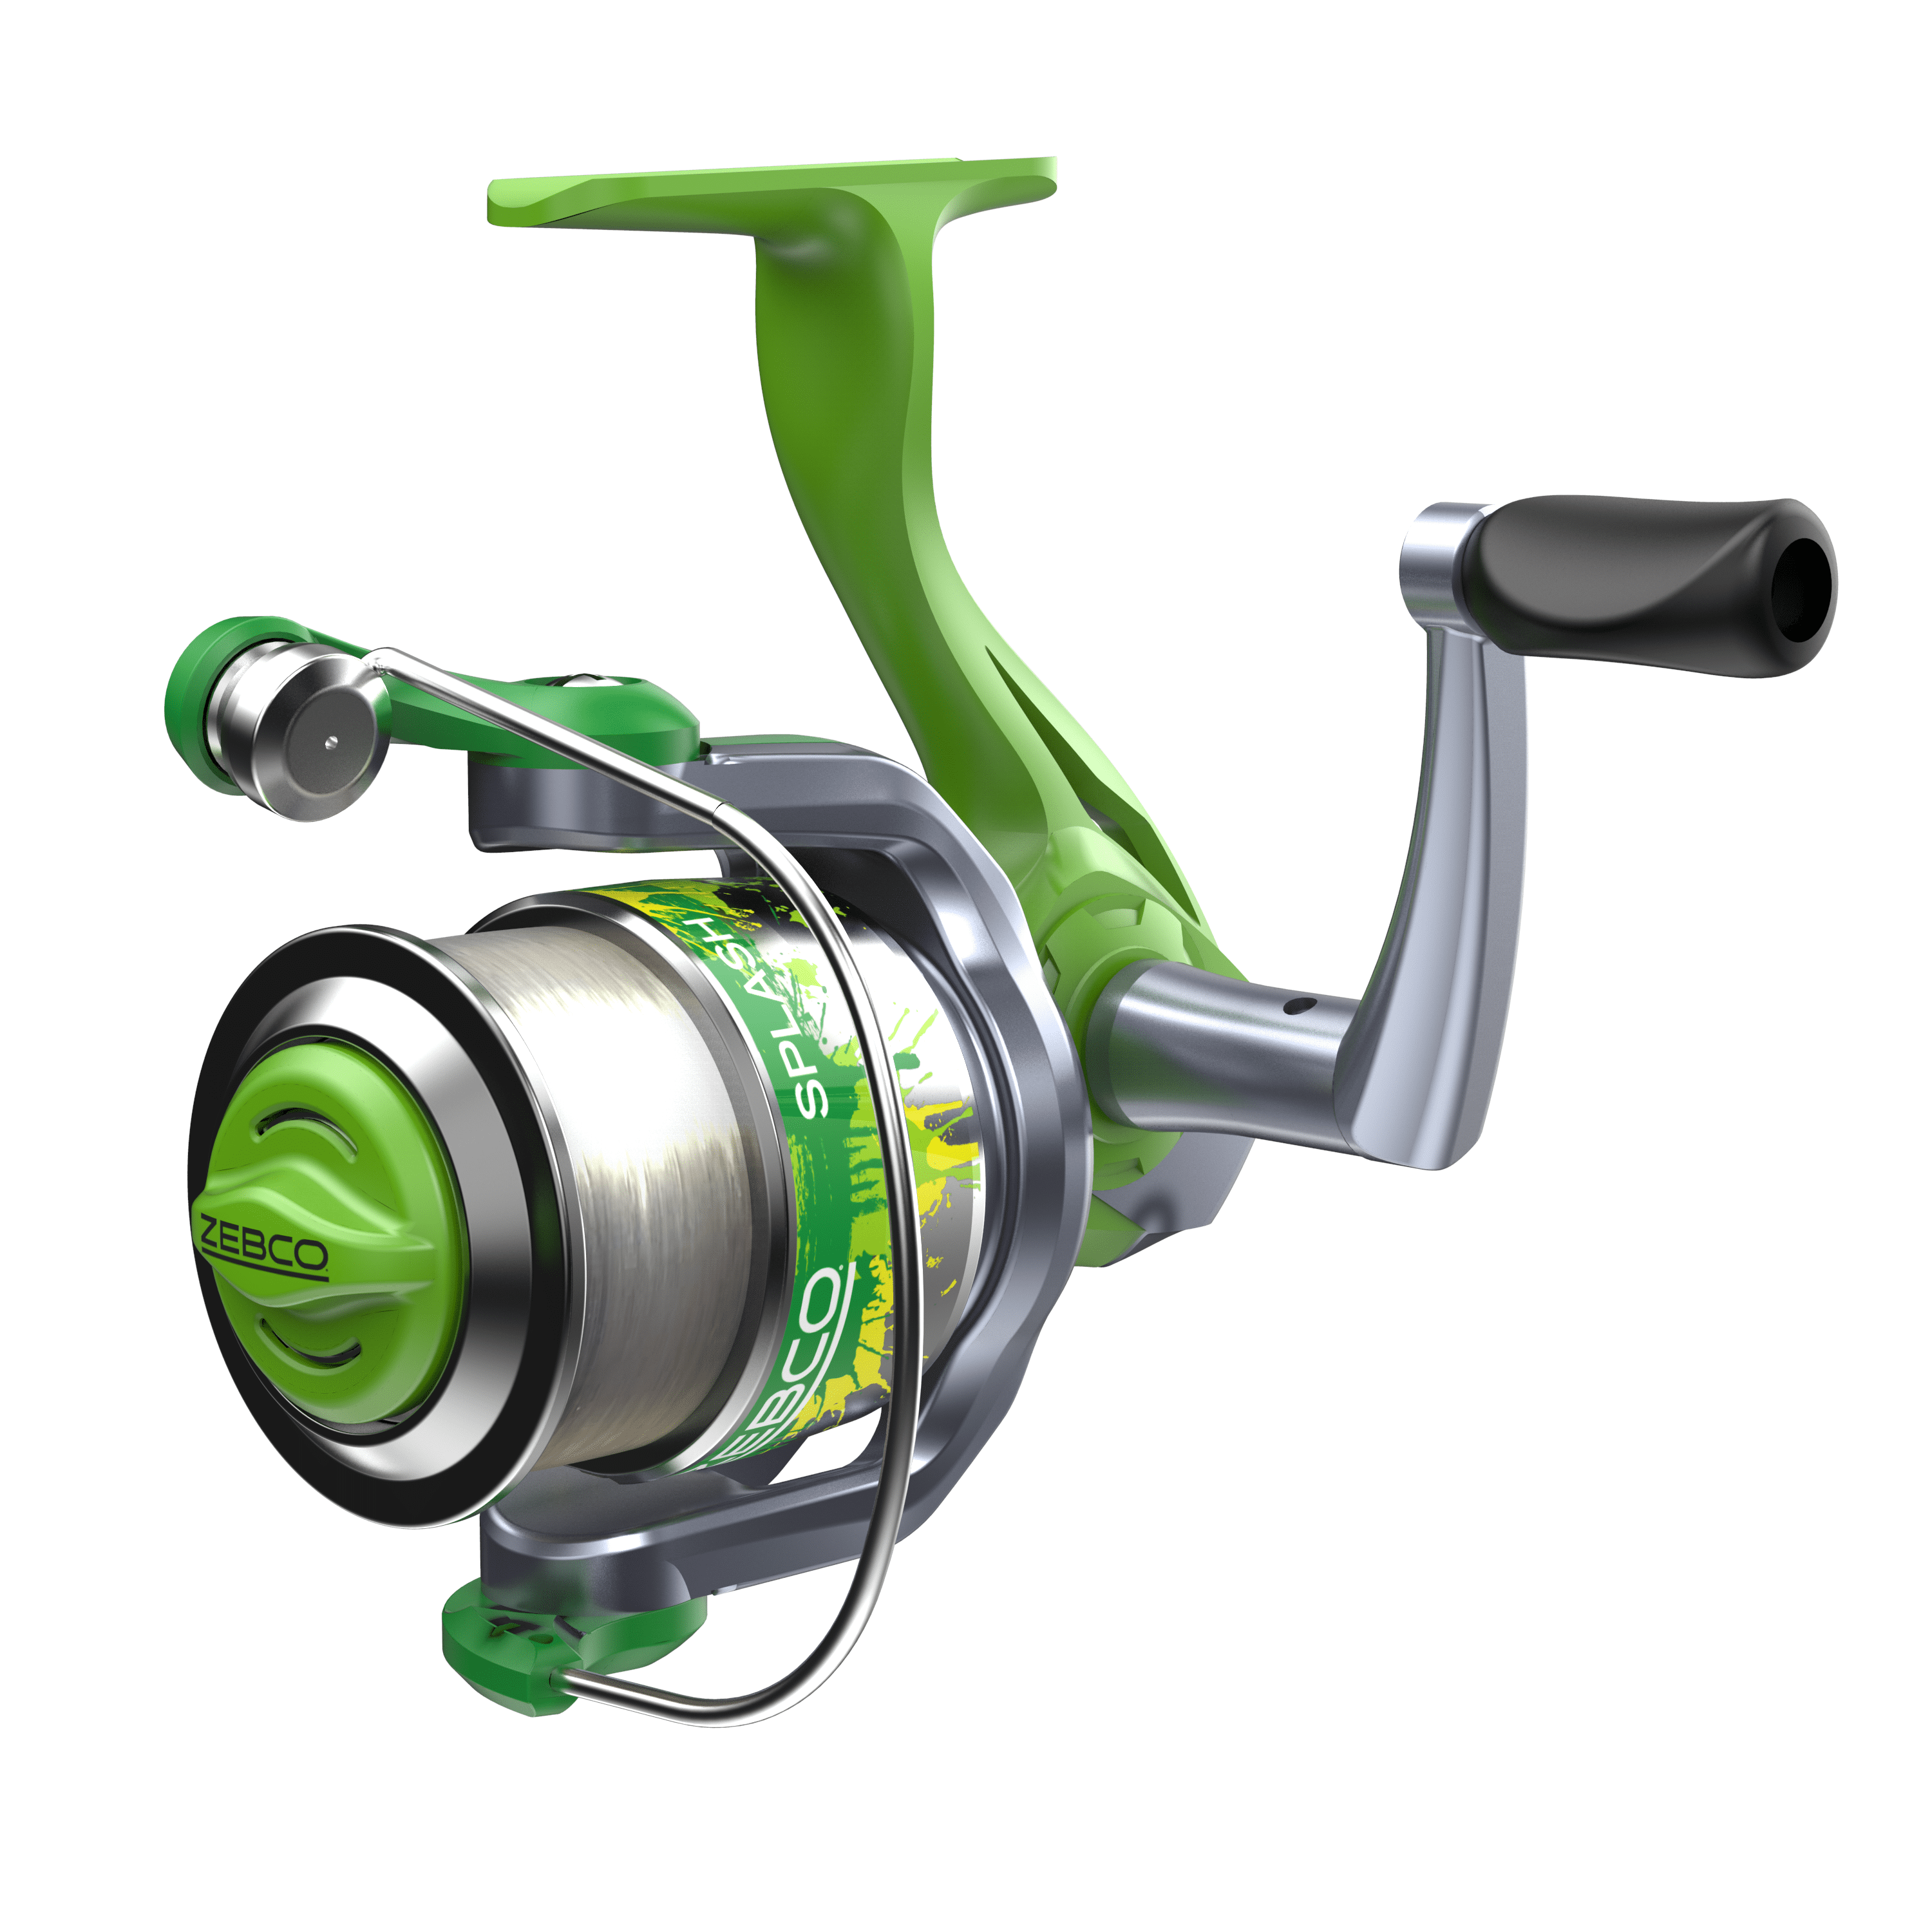 Zebco Splash Spinning Reel and Fishing Rod Combo, Green 